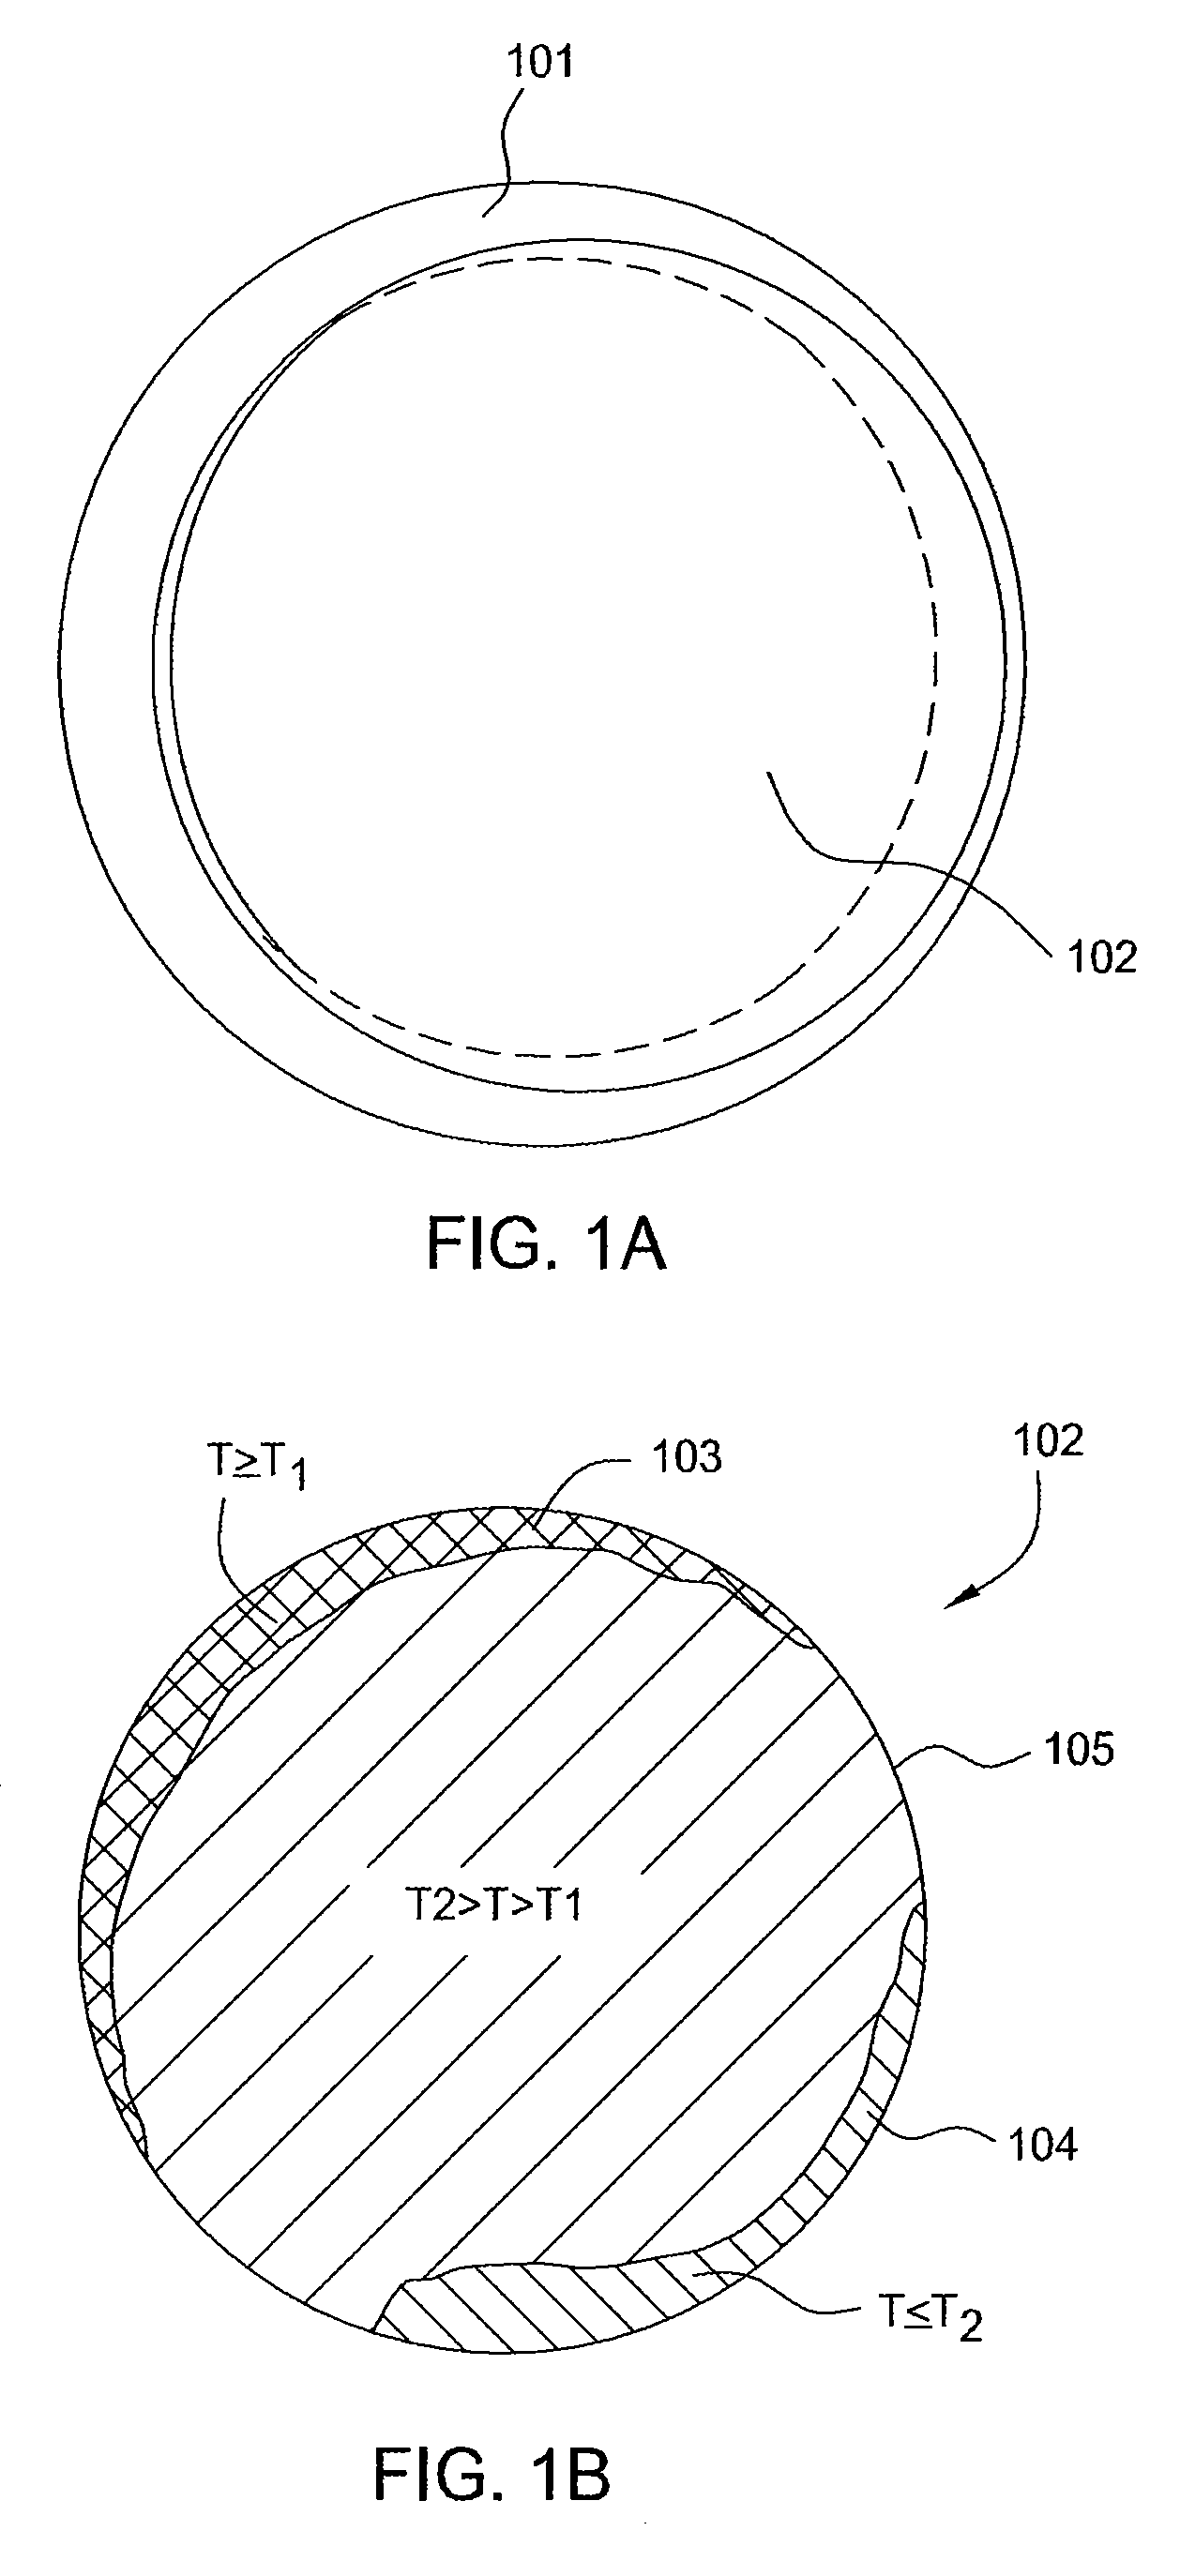 System for non radial temperature control for rotating substrates